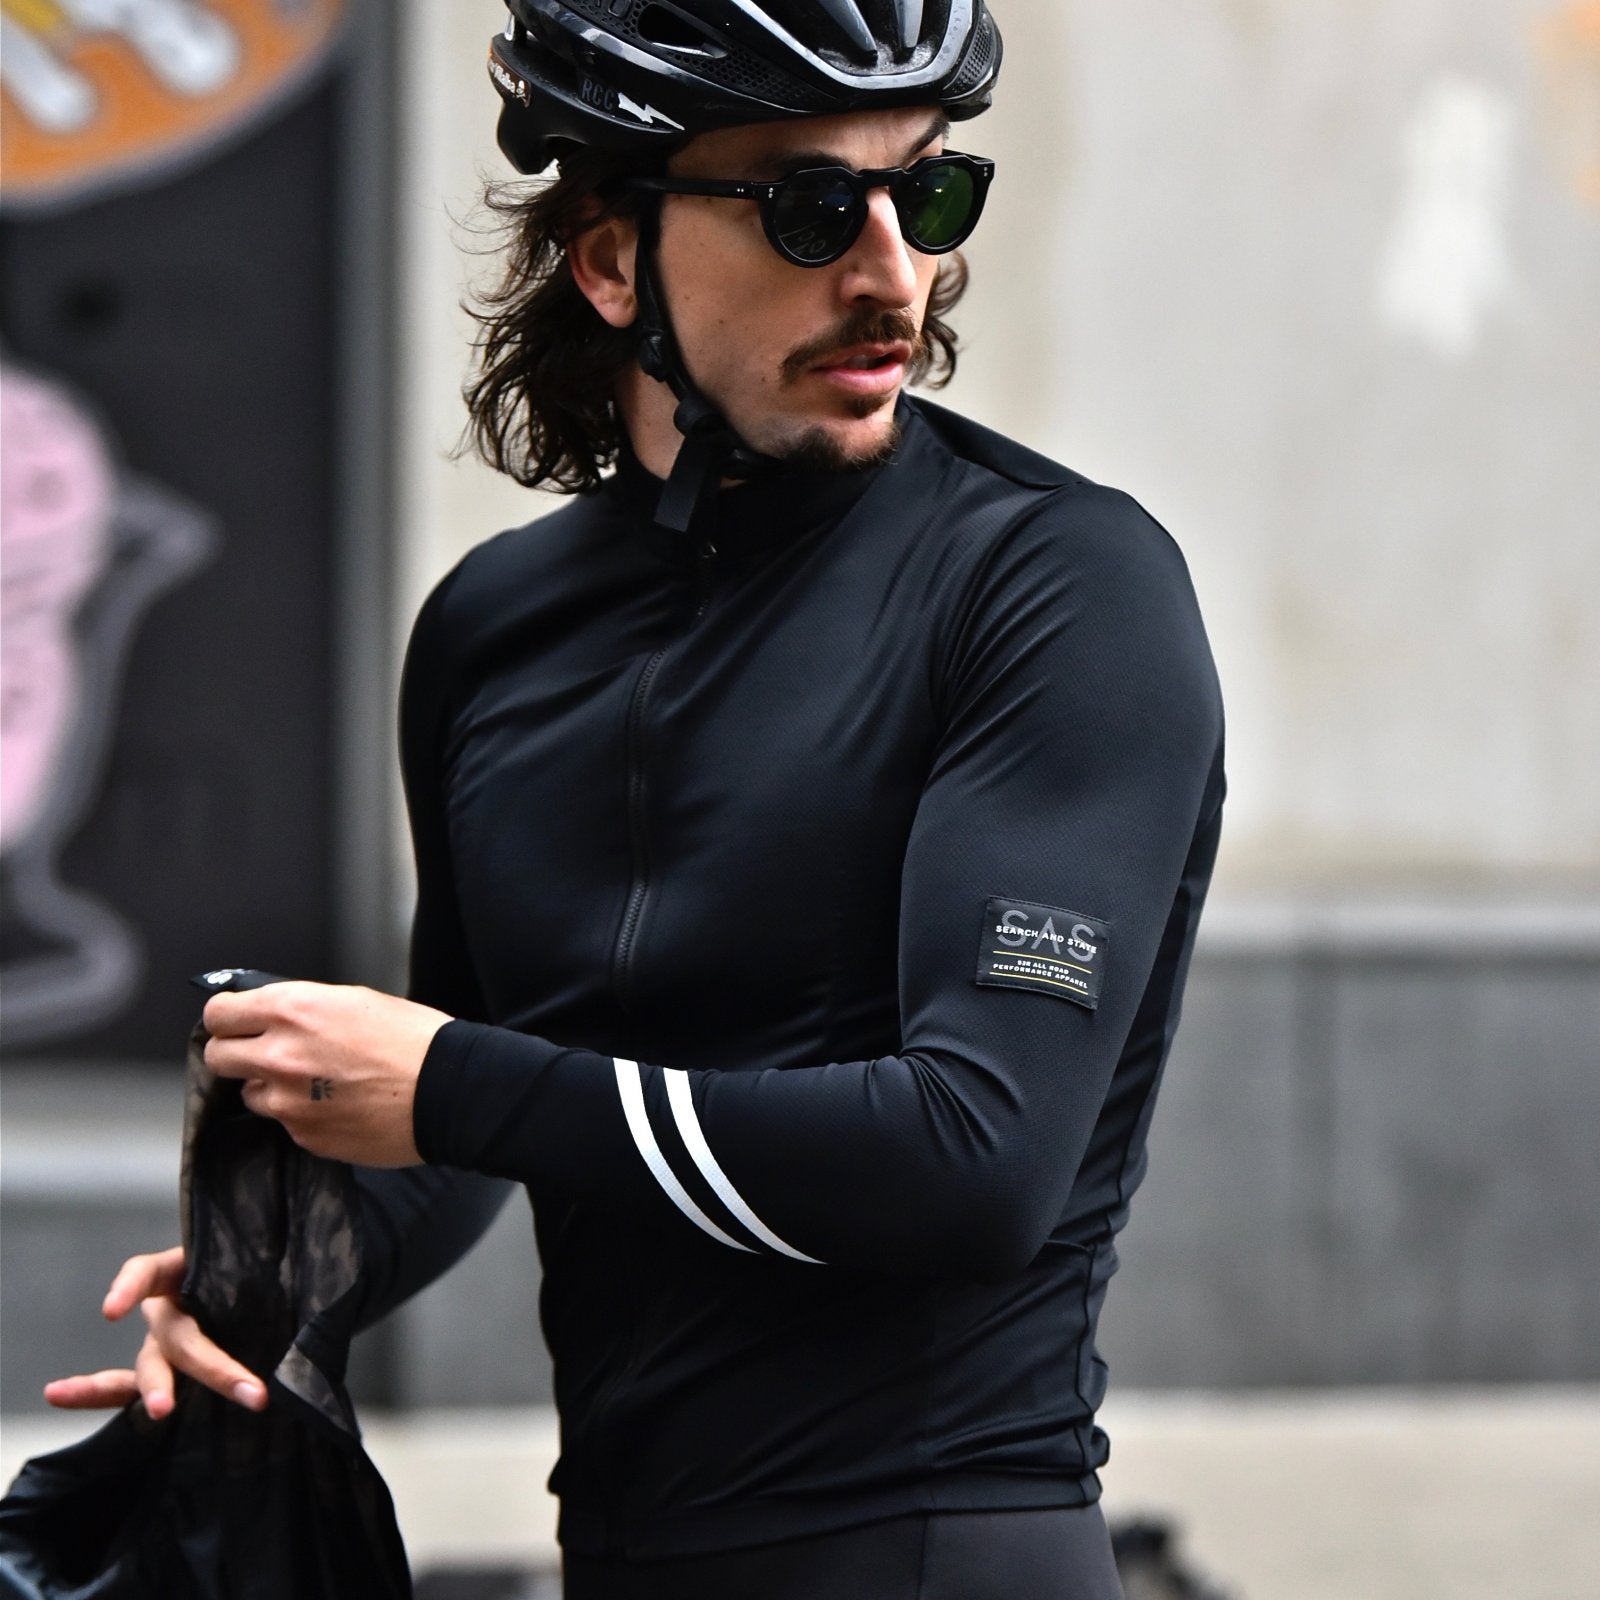 SEARCH AND STATE S2 Long Sleeve Synth Jersey